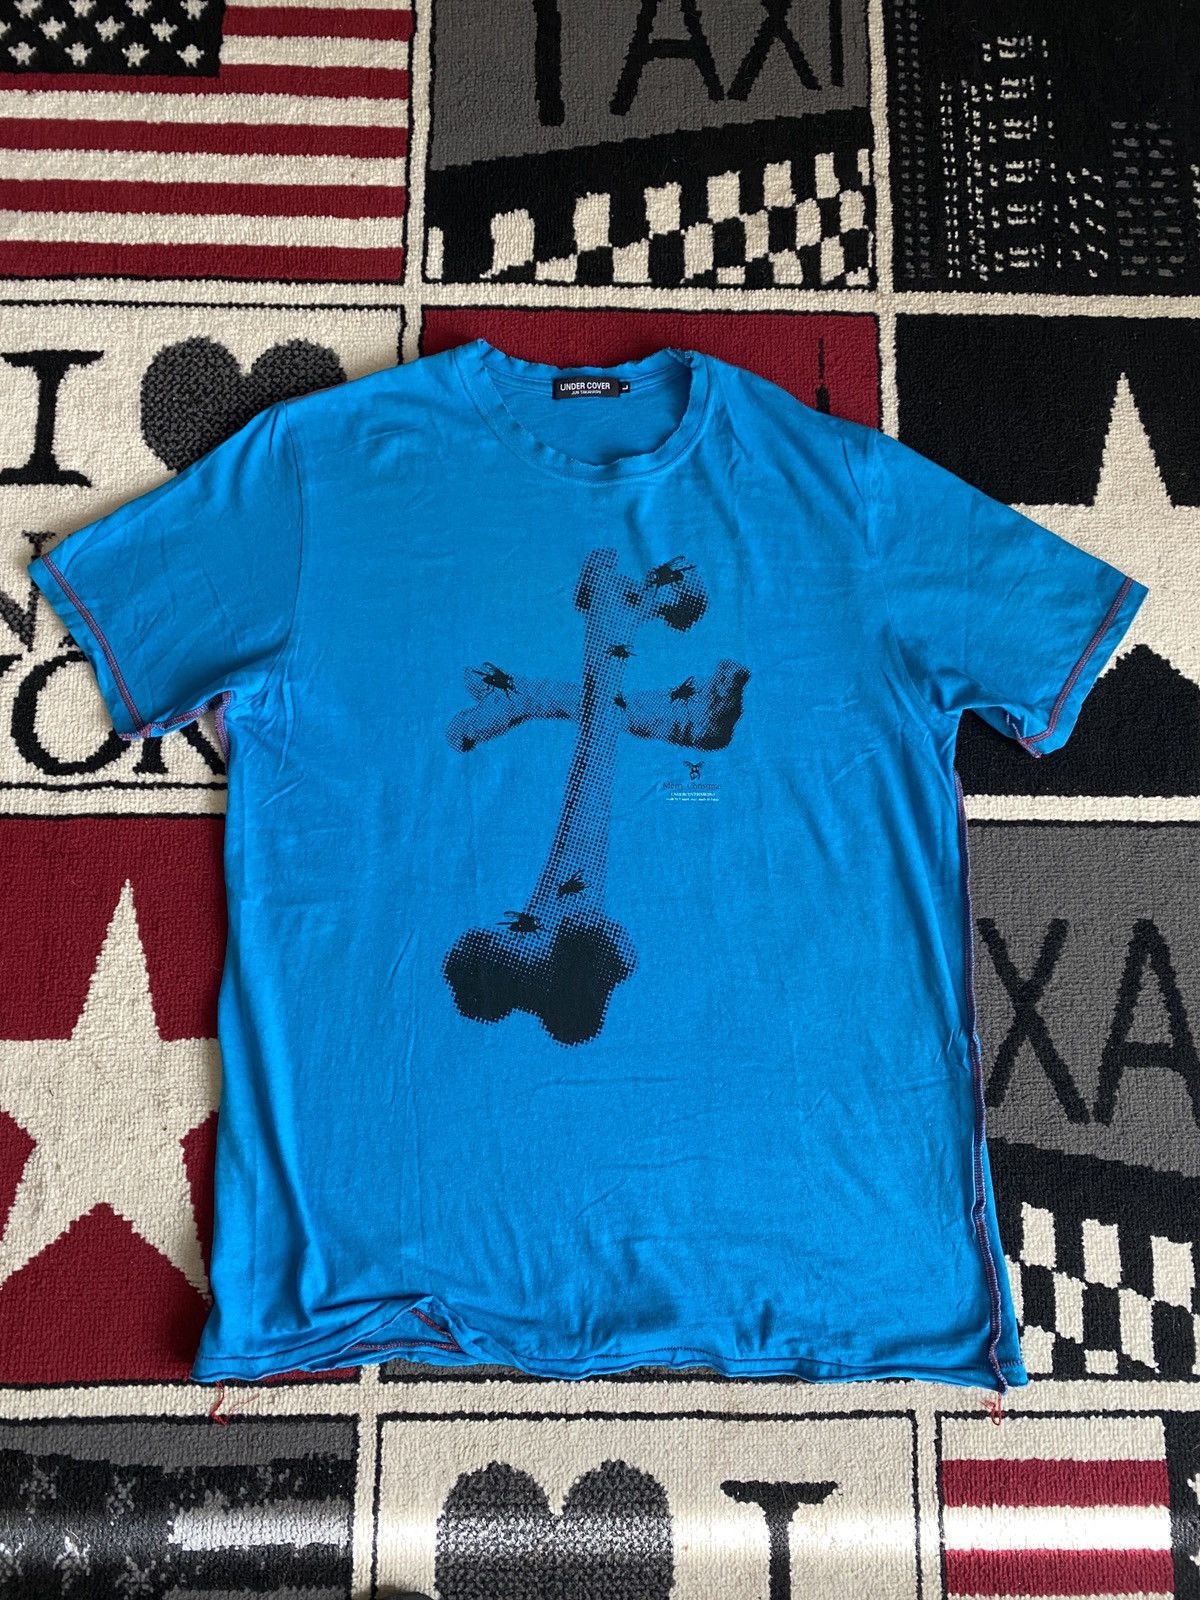 Pre-owned Undercover 2003 Cross Bone Blue Tee Limited Christmas